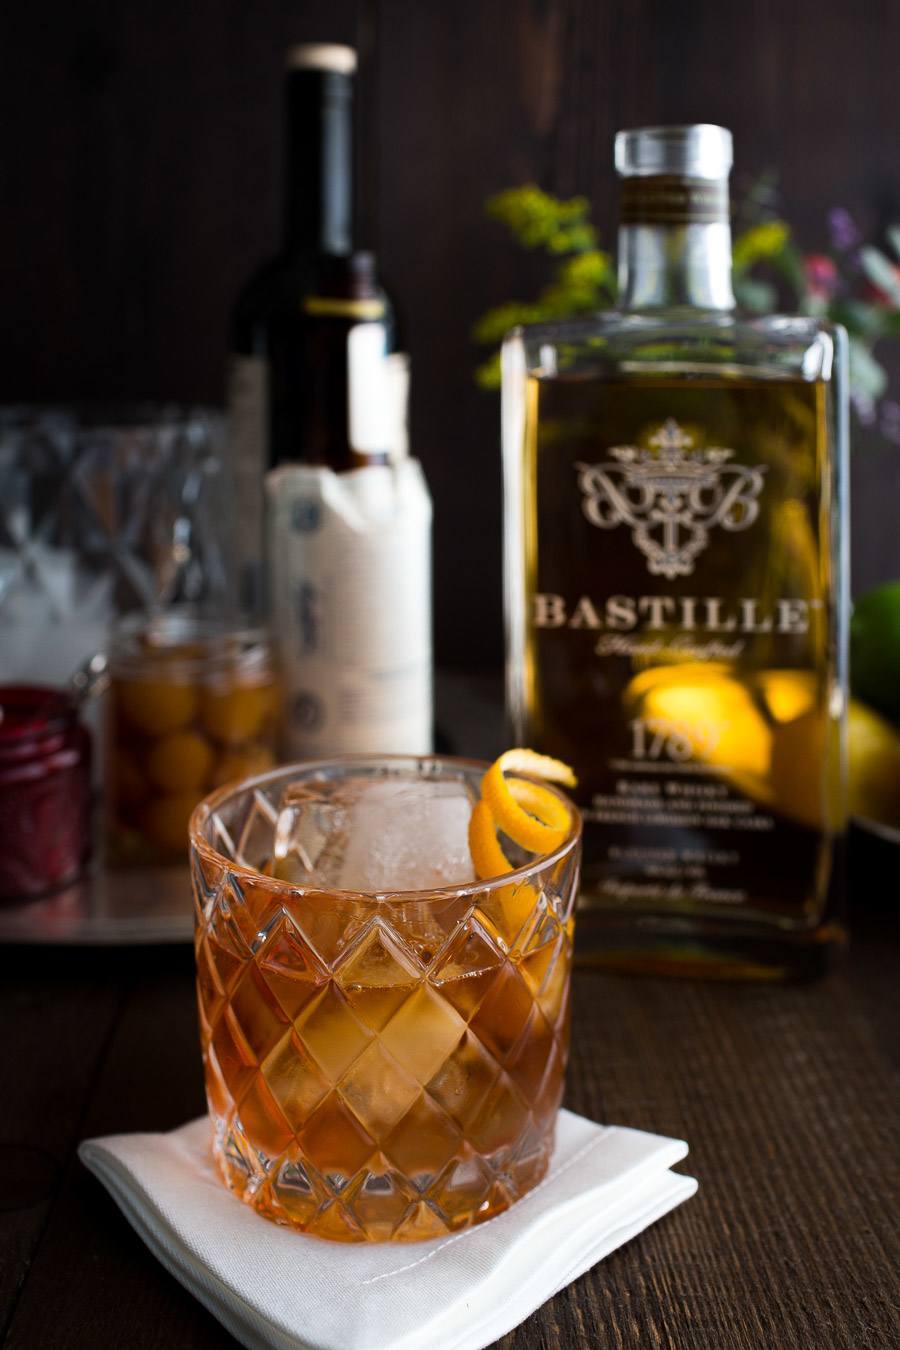 The French Old Fashioned